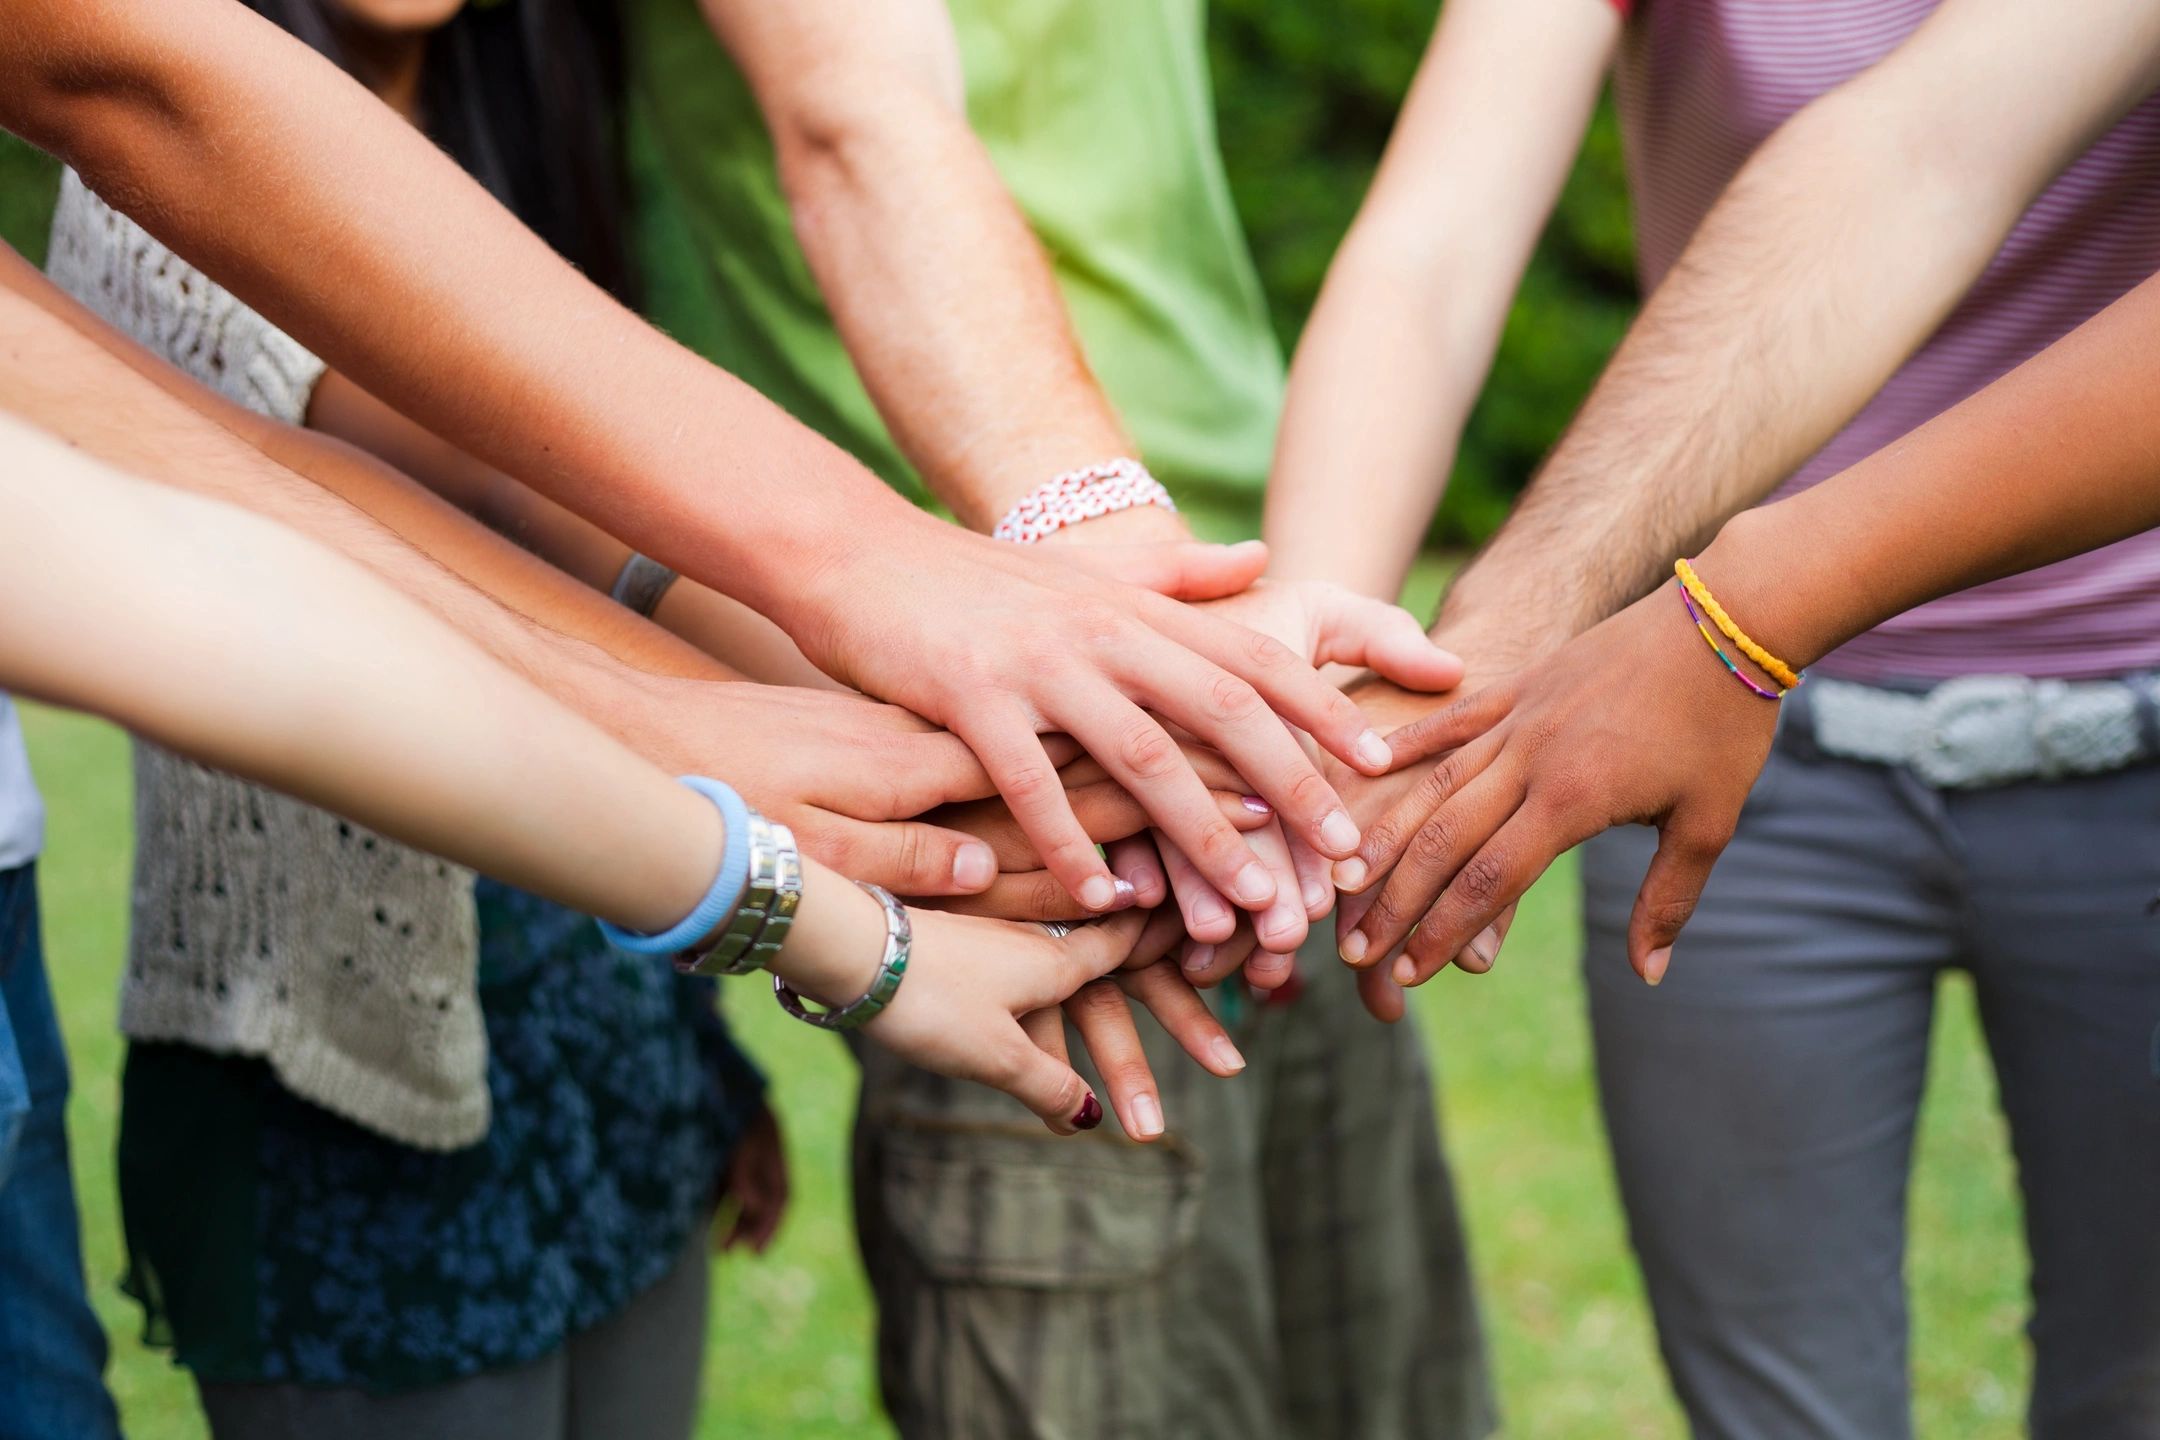 A group of people of different races and genders with their hands stacked together in the middle.